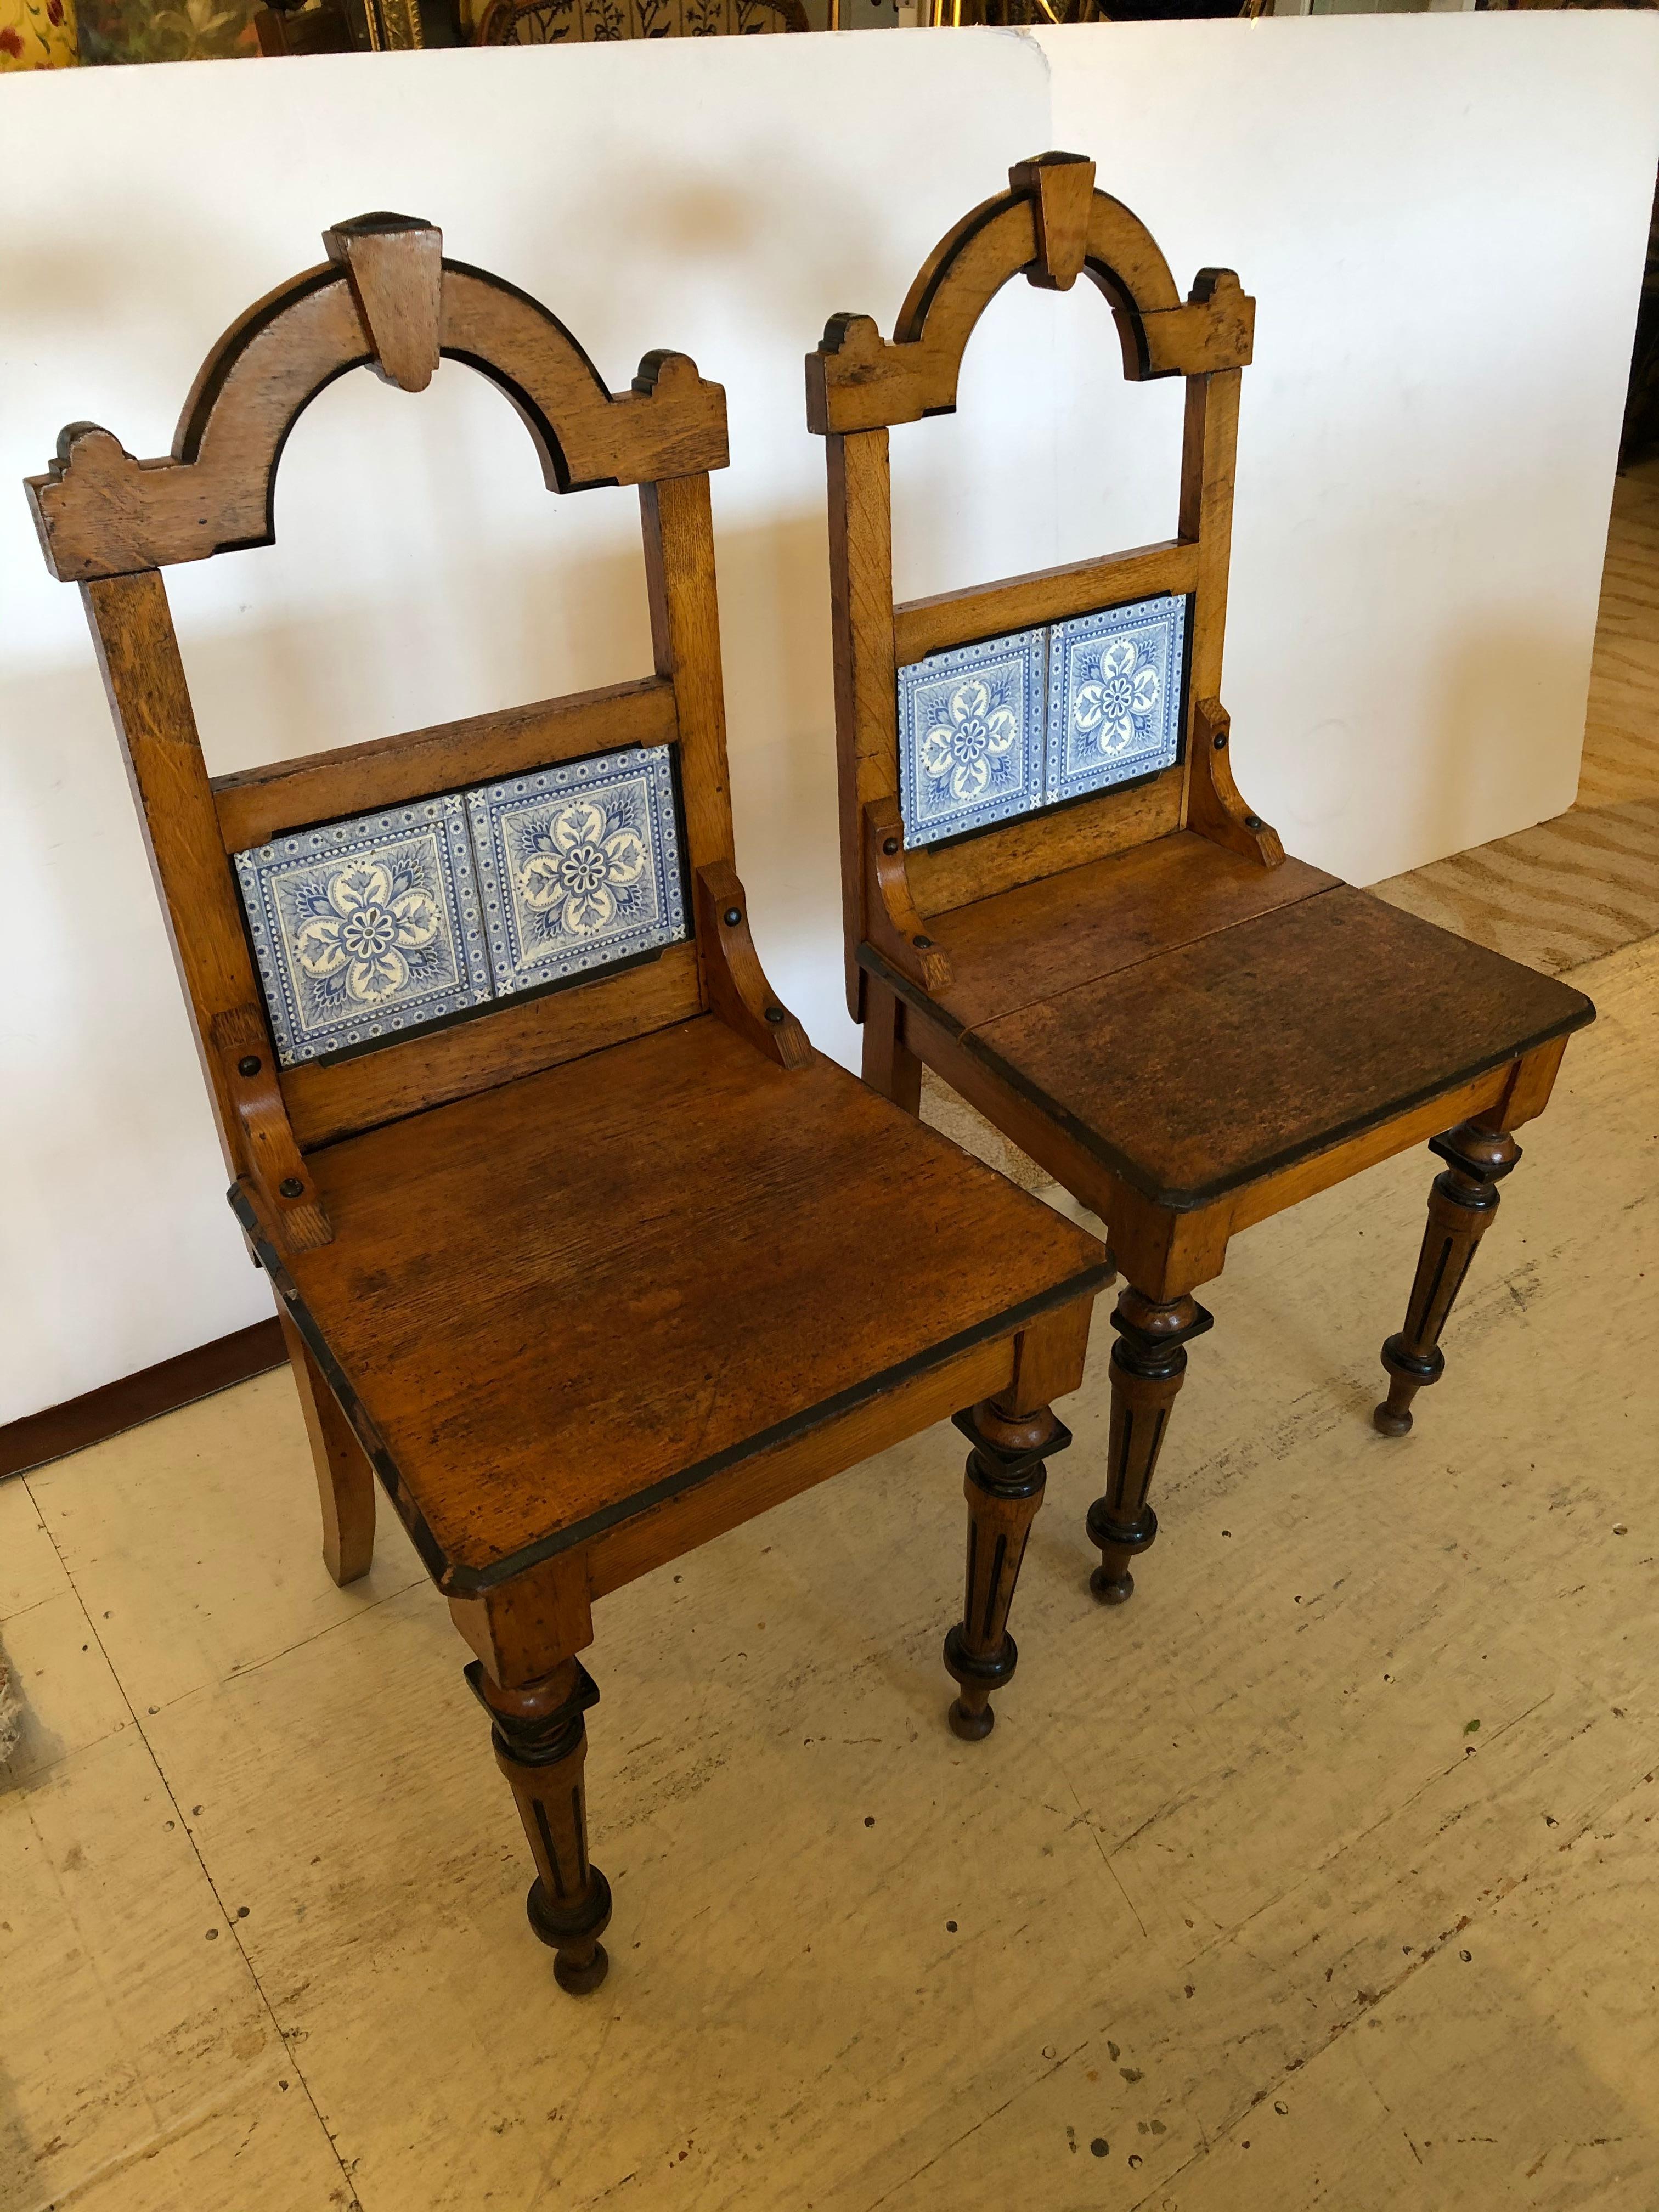 19th Century Enchanting Rare Pair of French Oak and Tile Arts & Crafts Side Chairs